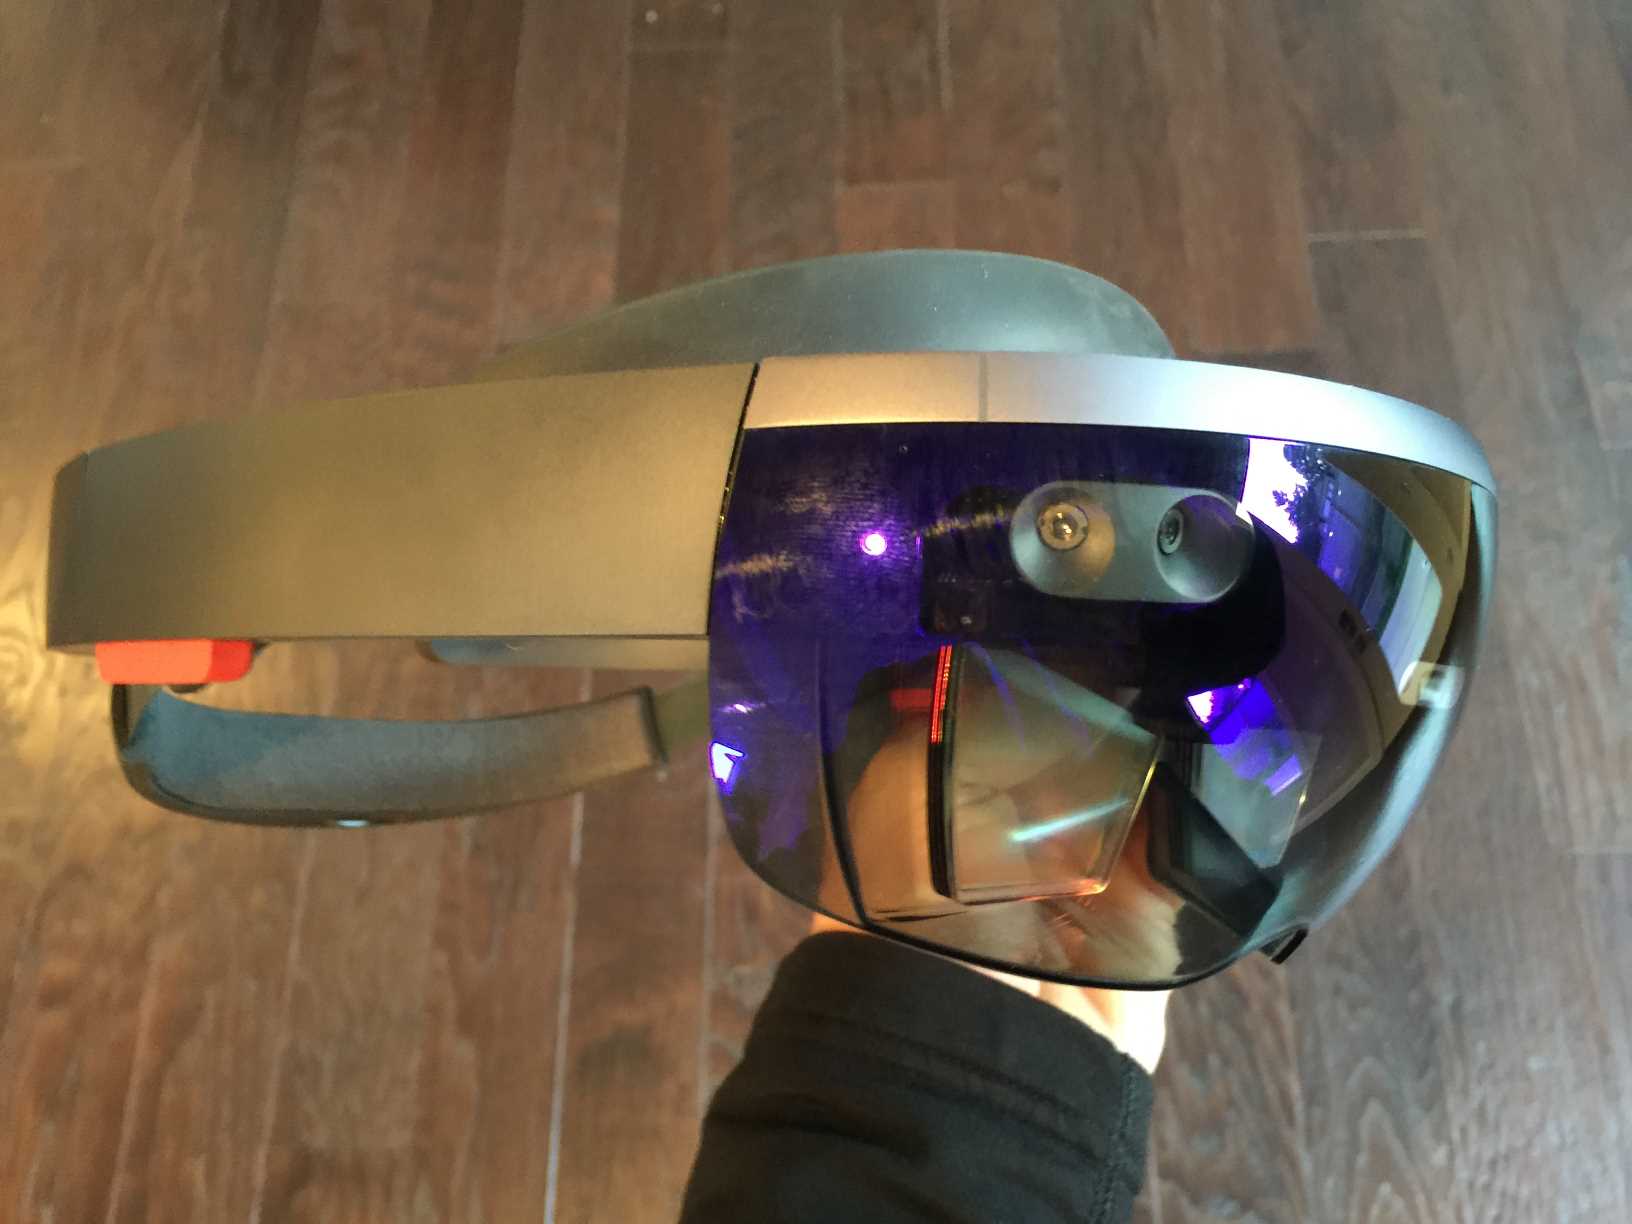 Experience with Microsoft HoloLens hands on